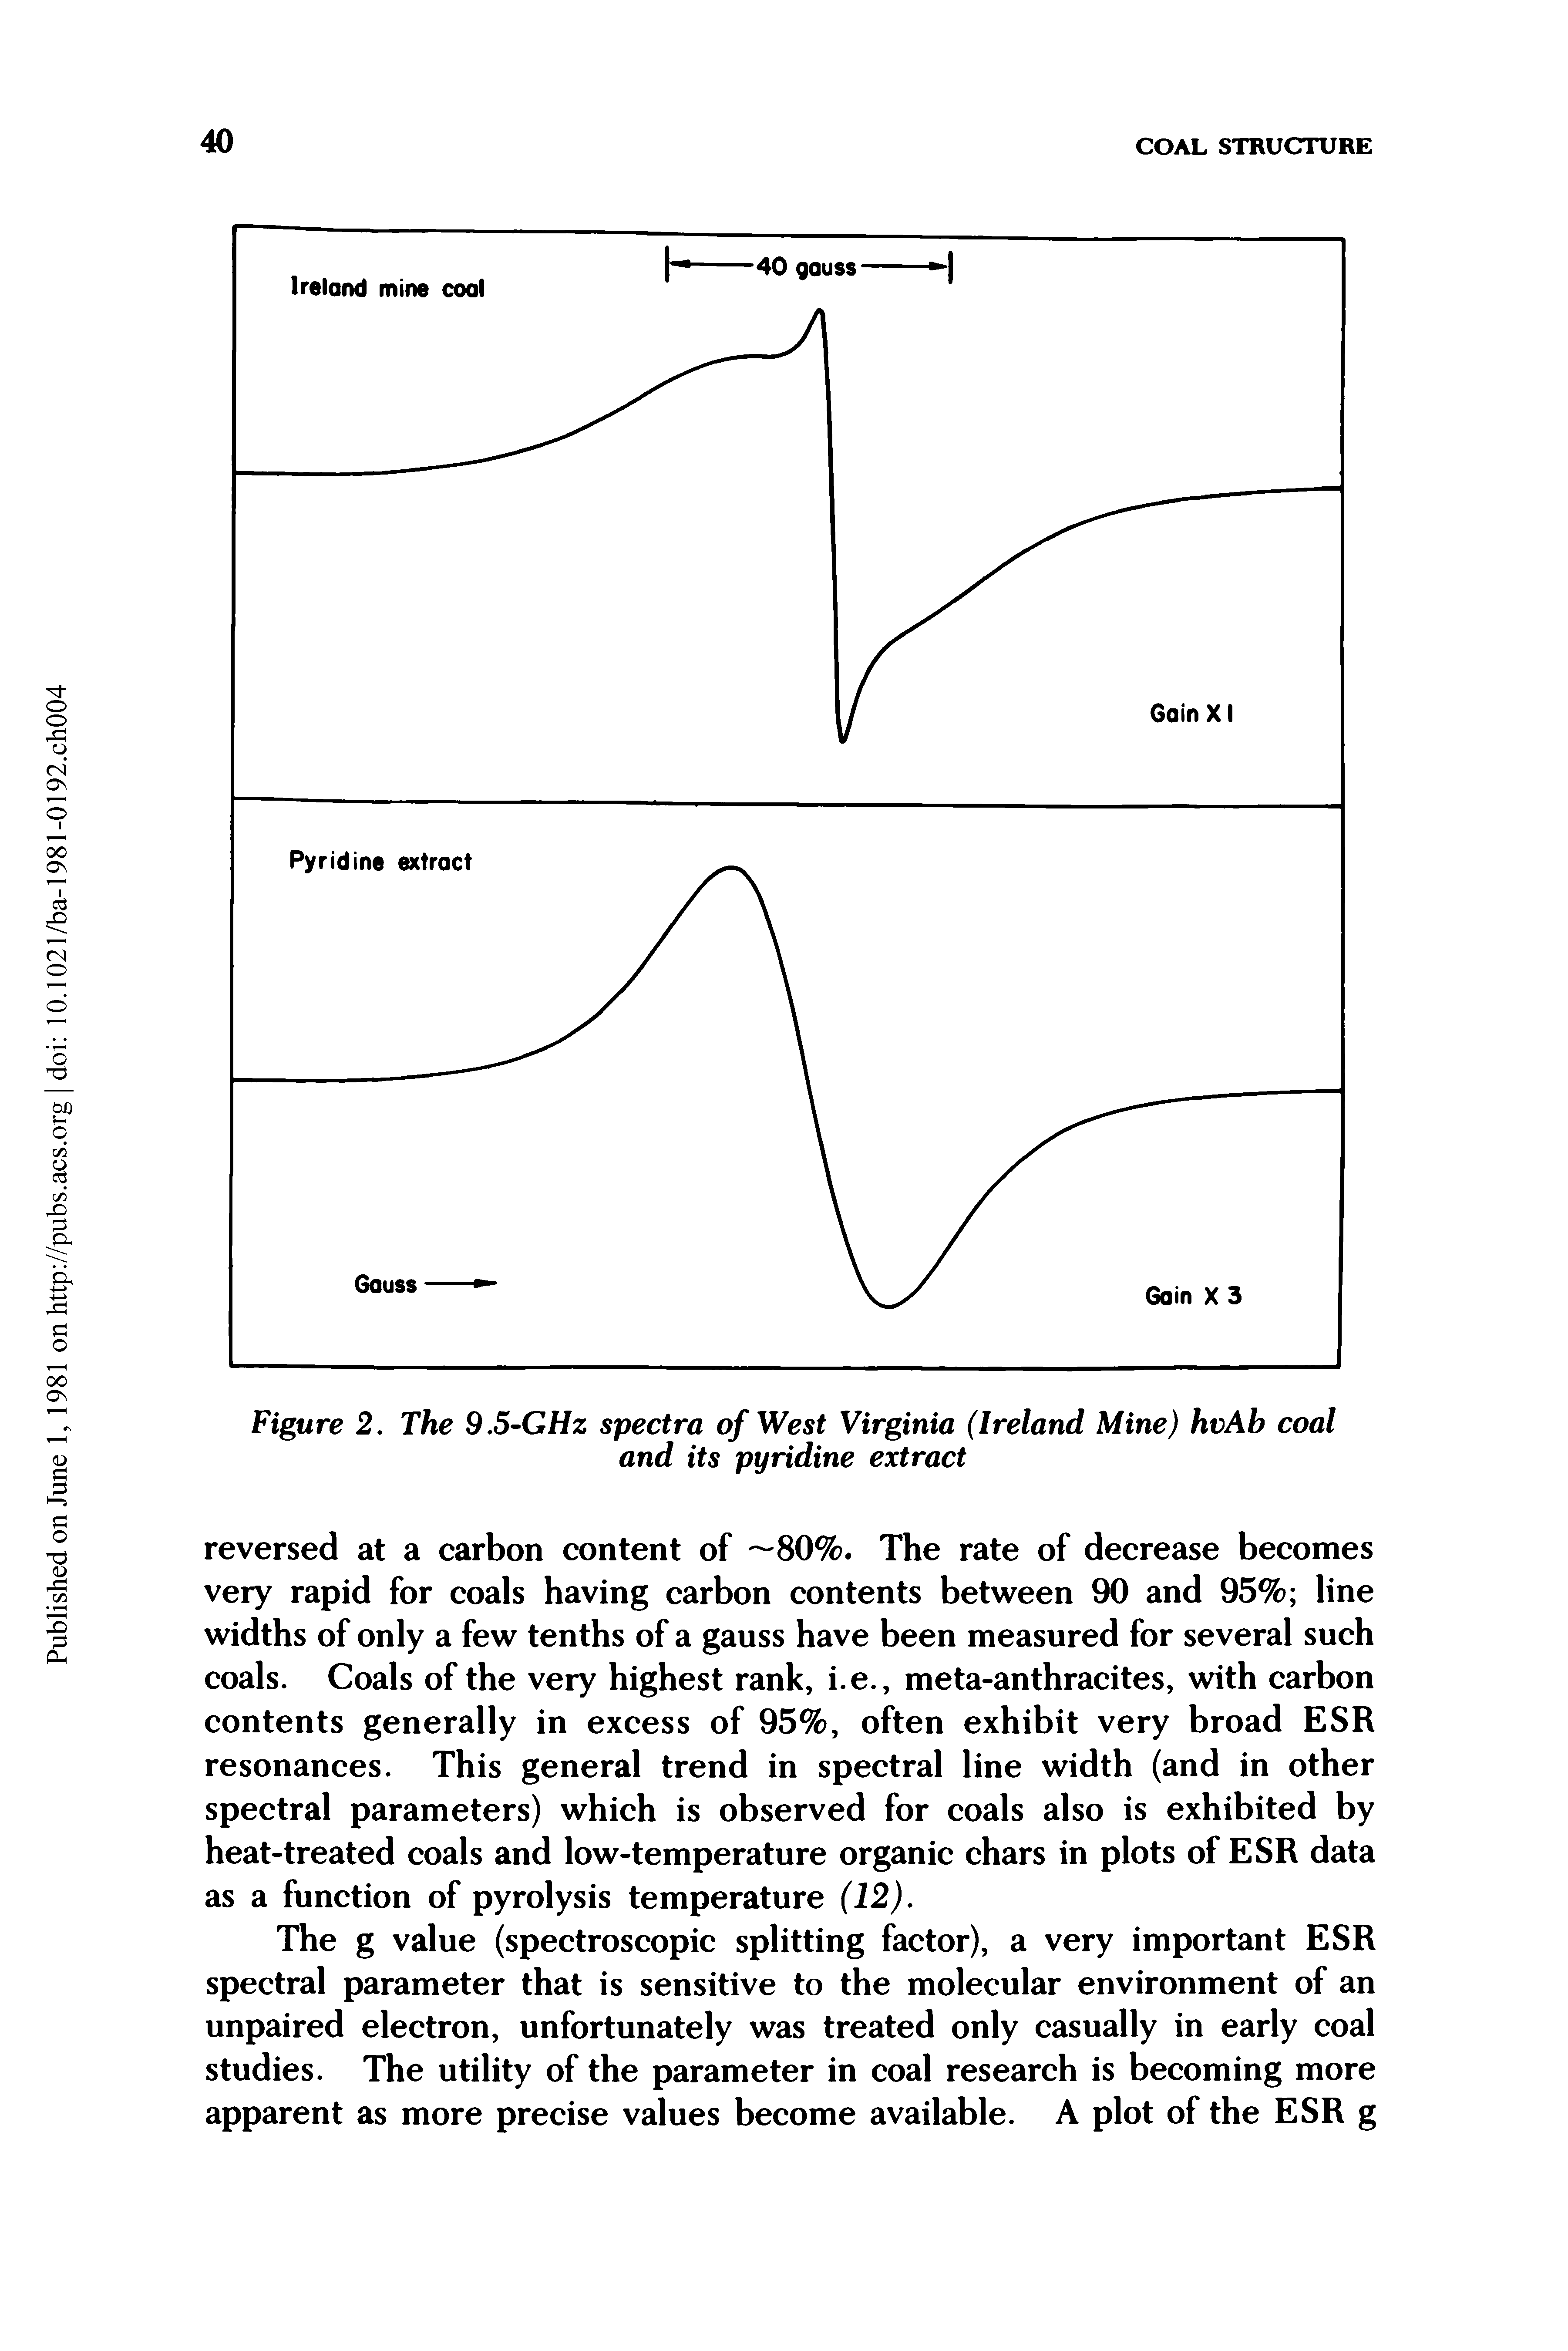 Figure 2. The 9,5-GHz spectra of West Virginia (Ireland Mine) hvAb coal and its pyridine extract...